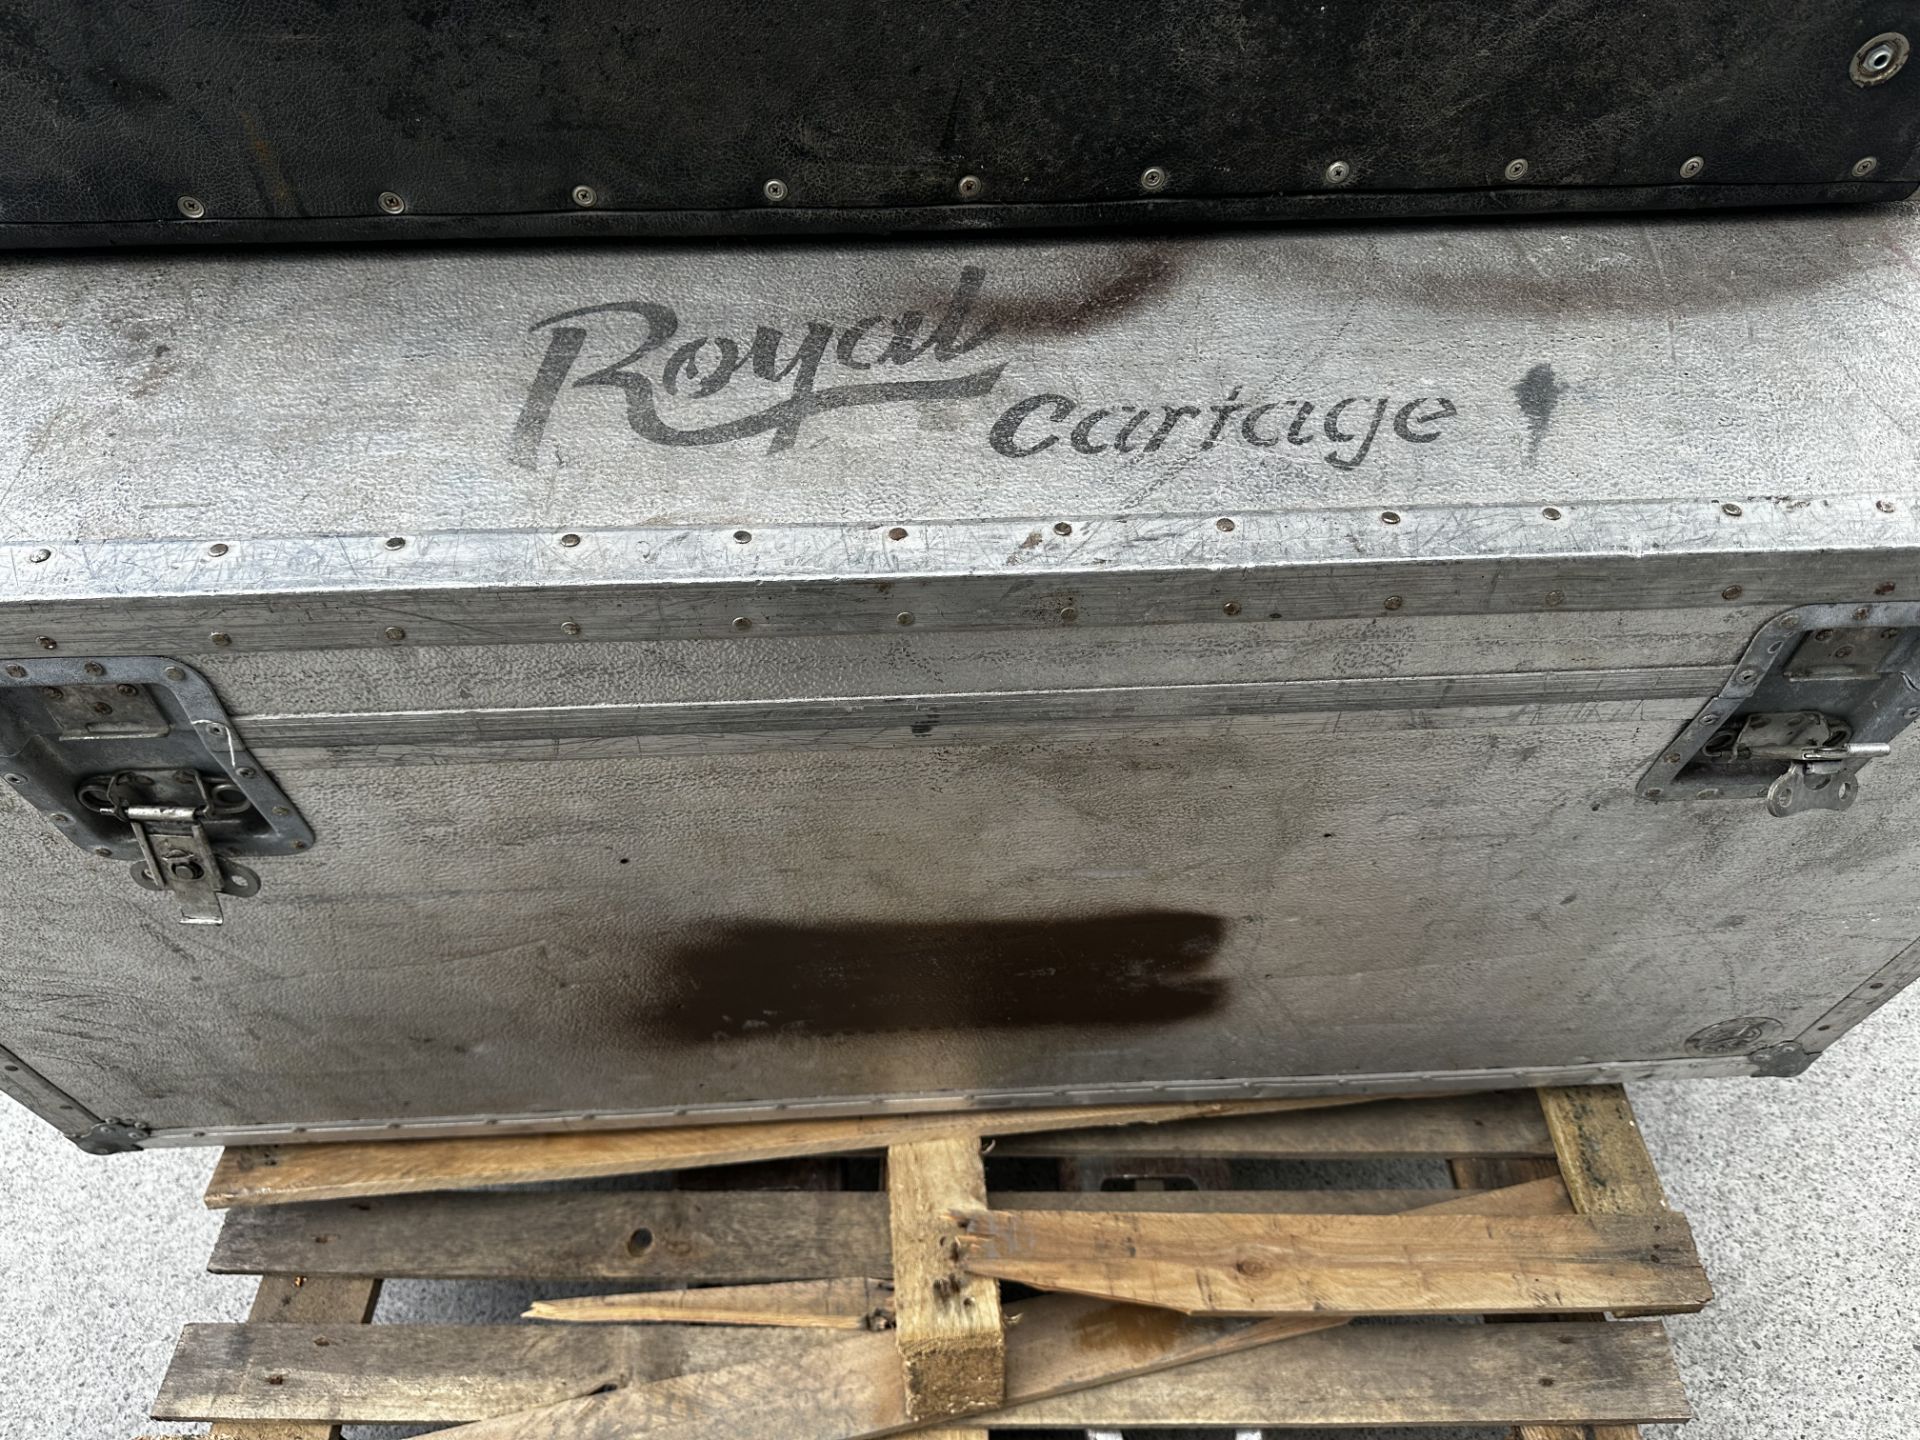 Vintage Royal Cartage Travel Trunk, 141*67*51cm Sourced From Luxury House Clearance - Image 2 of 4